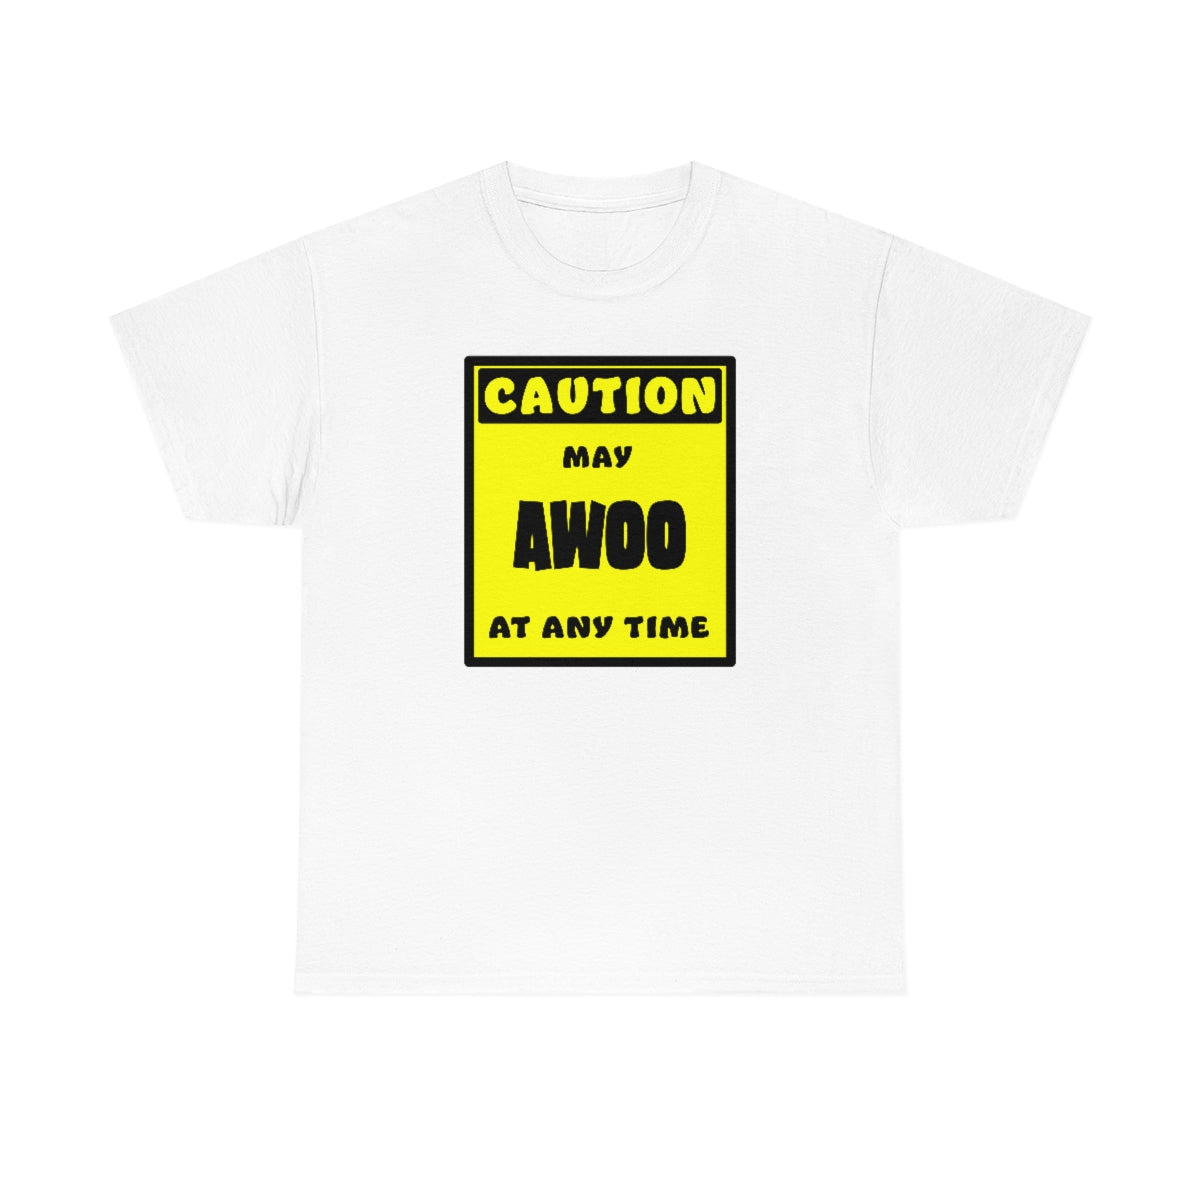 CAUTION! May AWOO at any time! - T-Shirt T-Shirt AFLT-Whootorca White S 